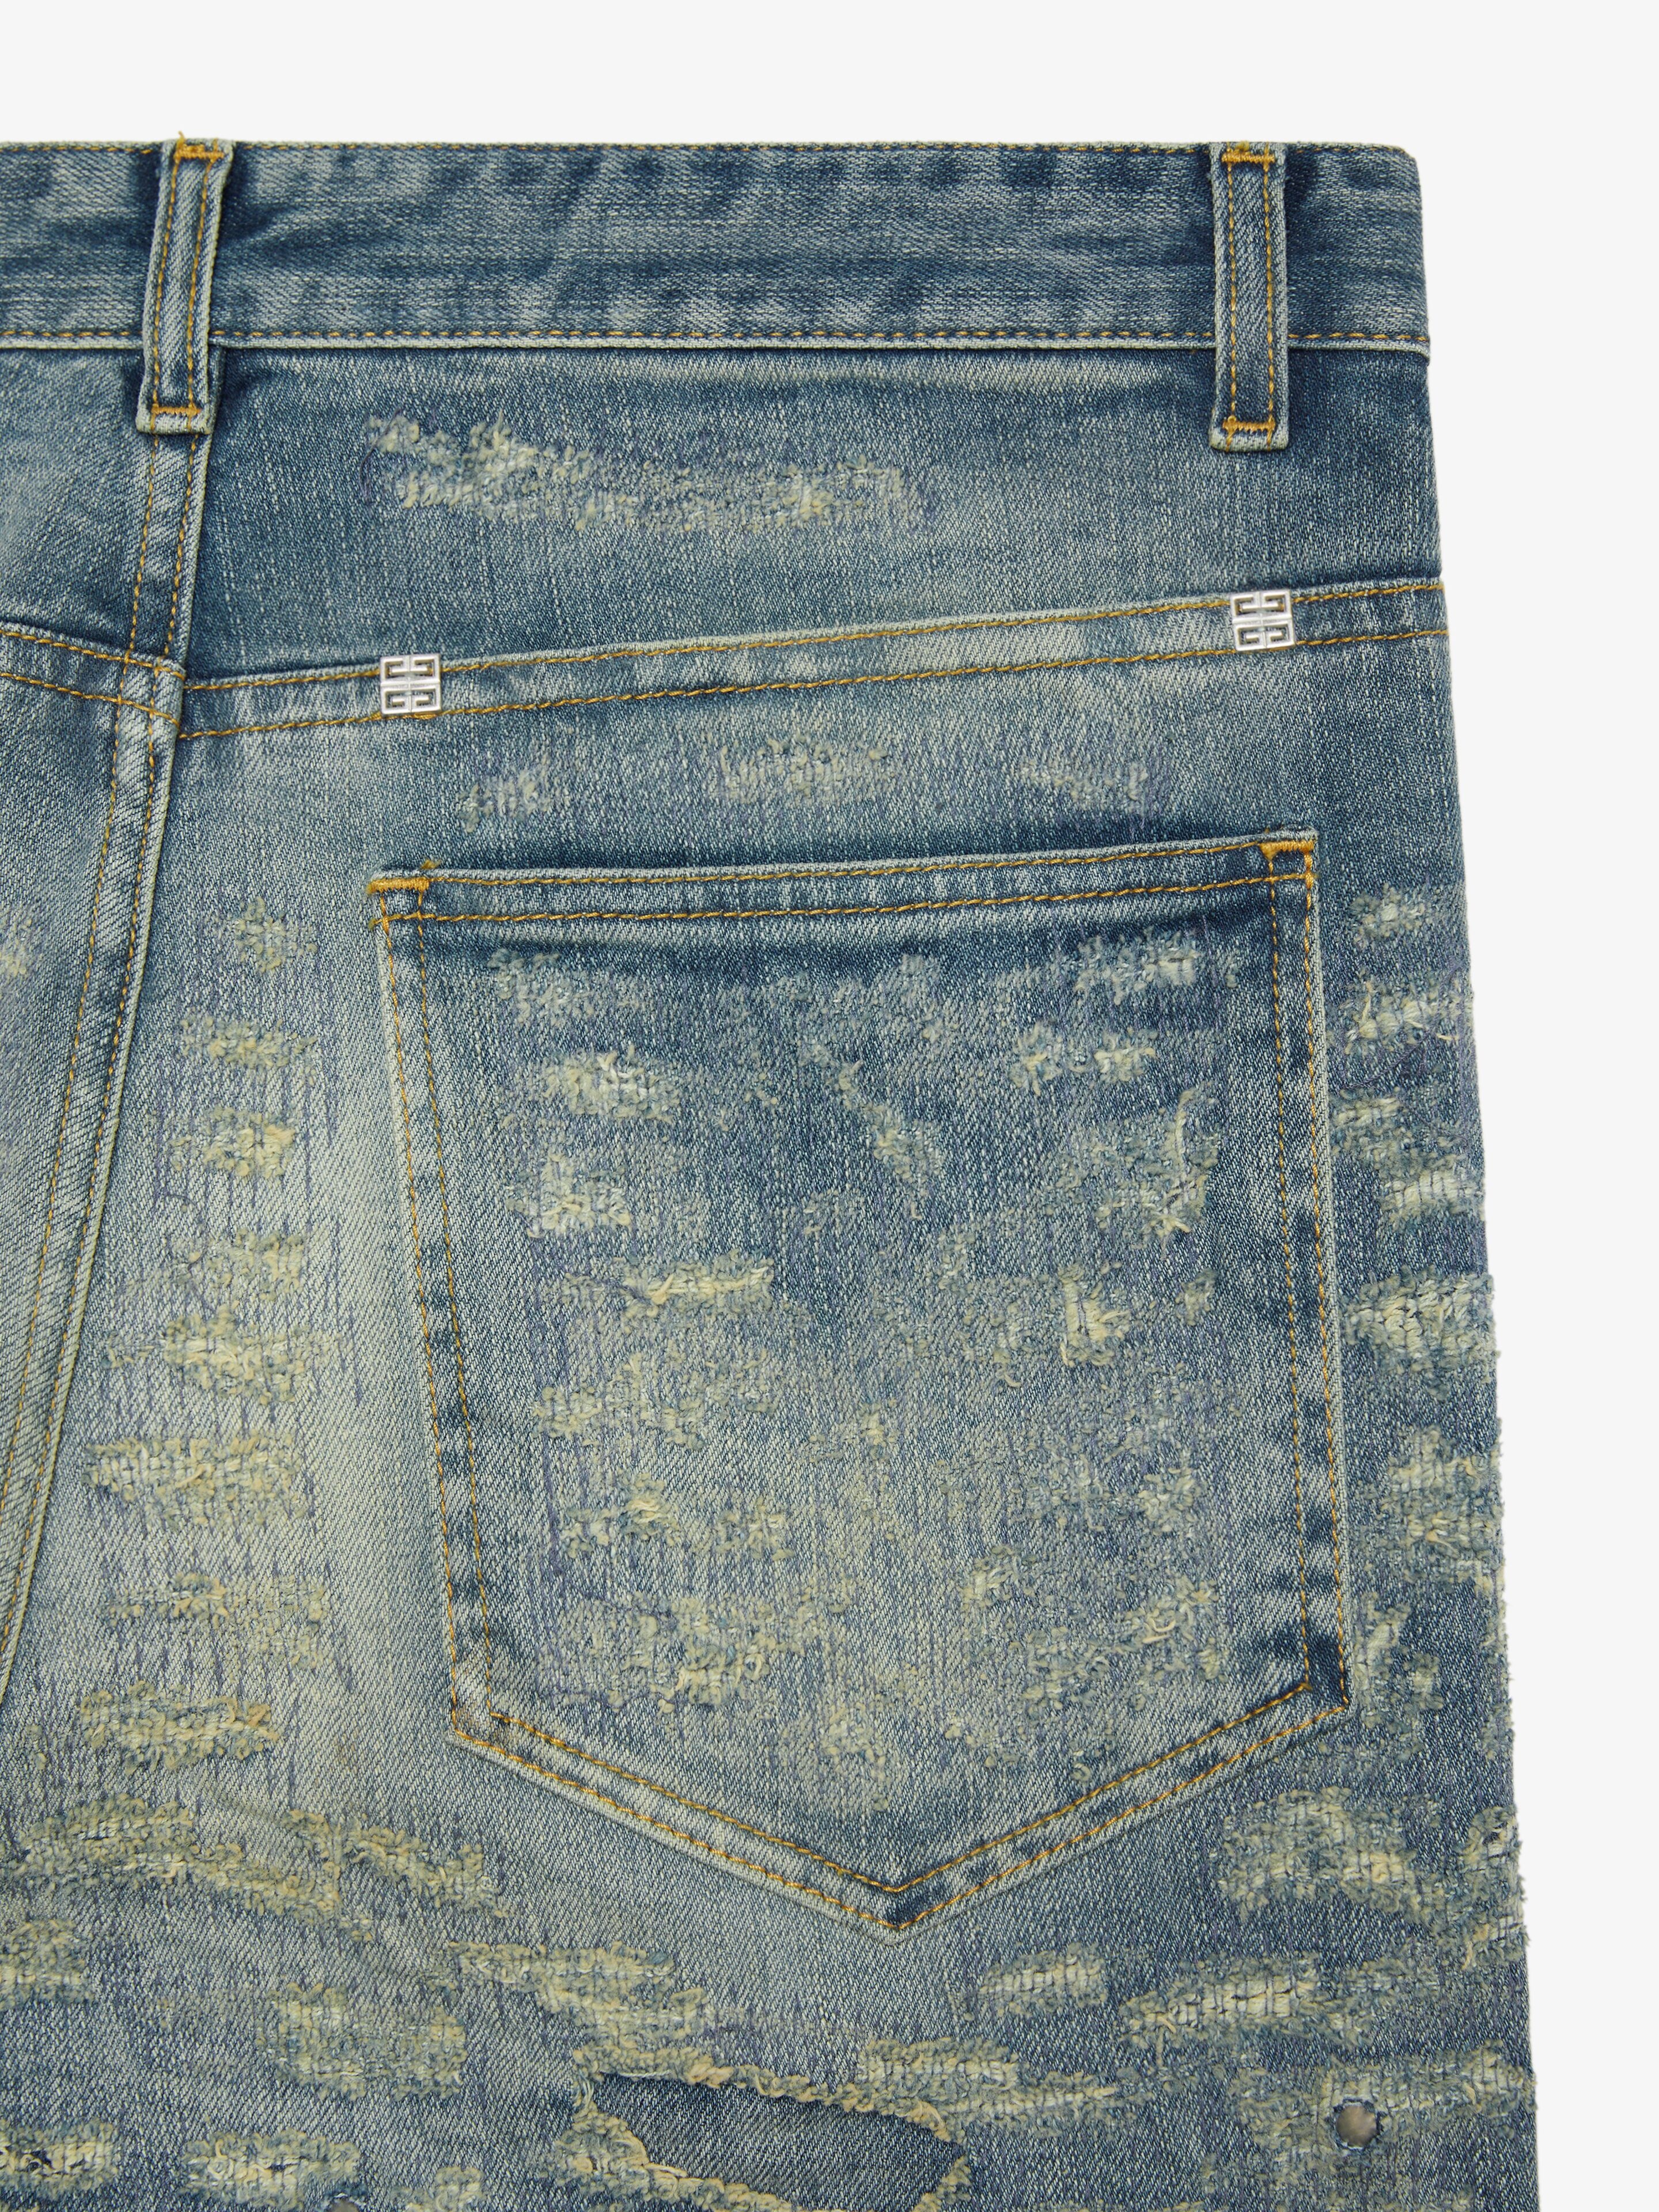 SLIM FIT JEANS IN DESTROYED DENIM WITH STUDS - 5